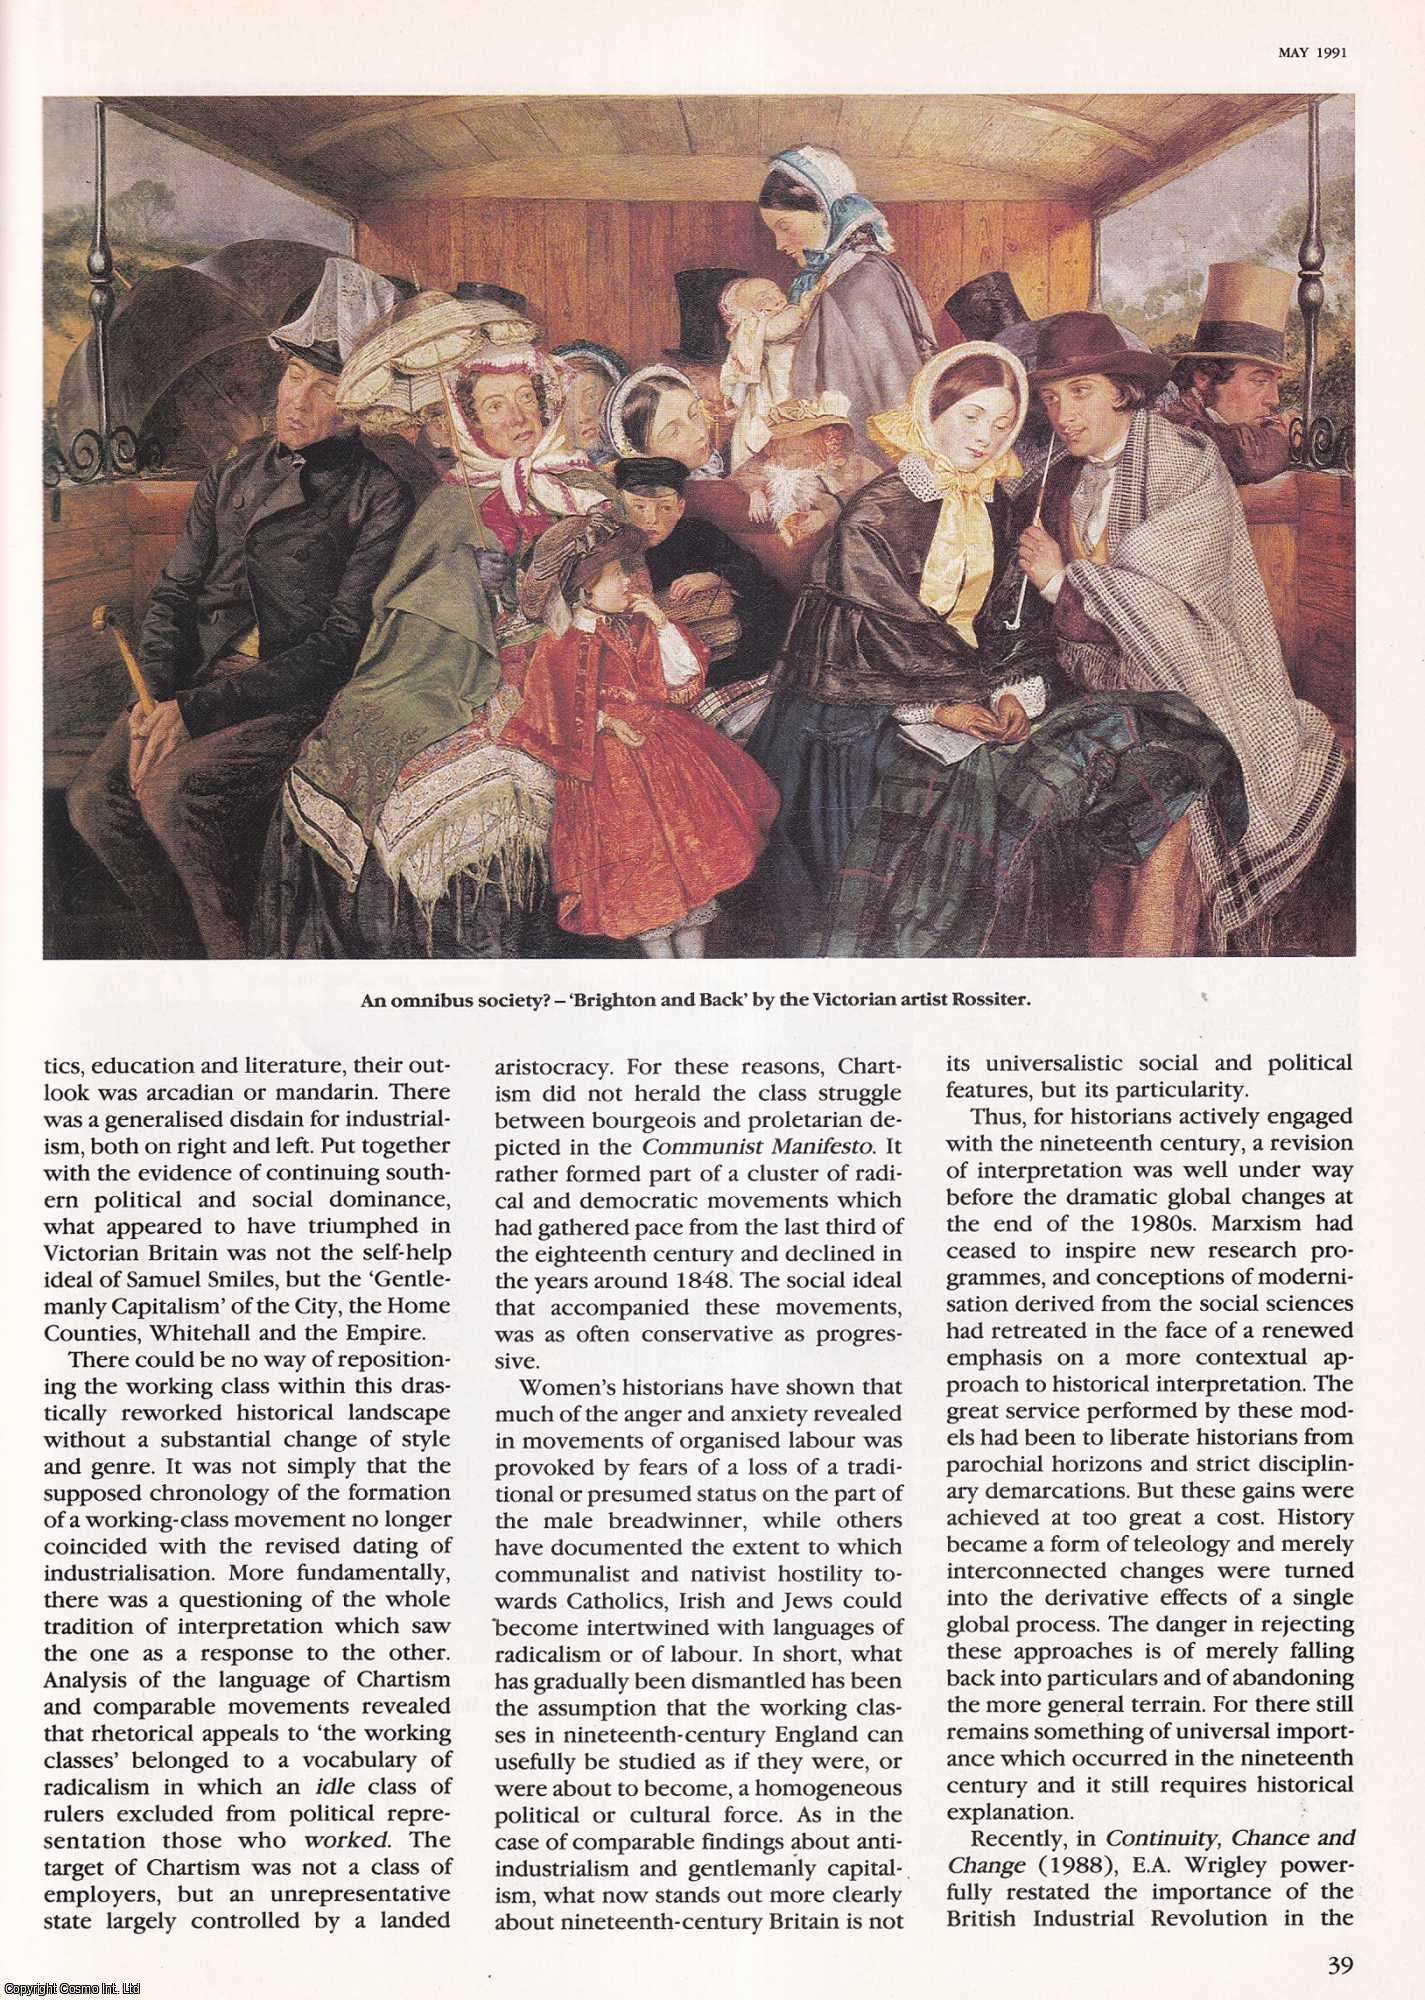 Gareth Stedman Jones - The Changing Face of 19th Century Britain. An original article from History Today, 1991.